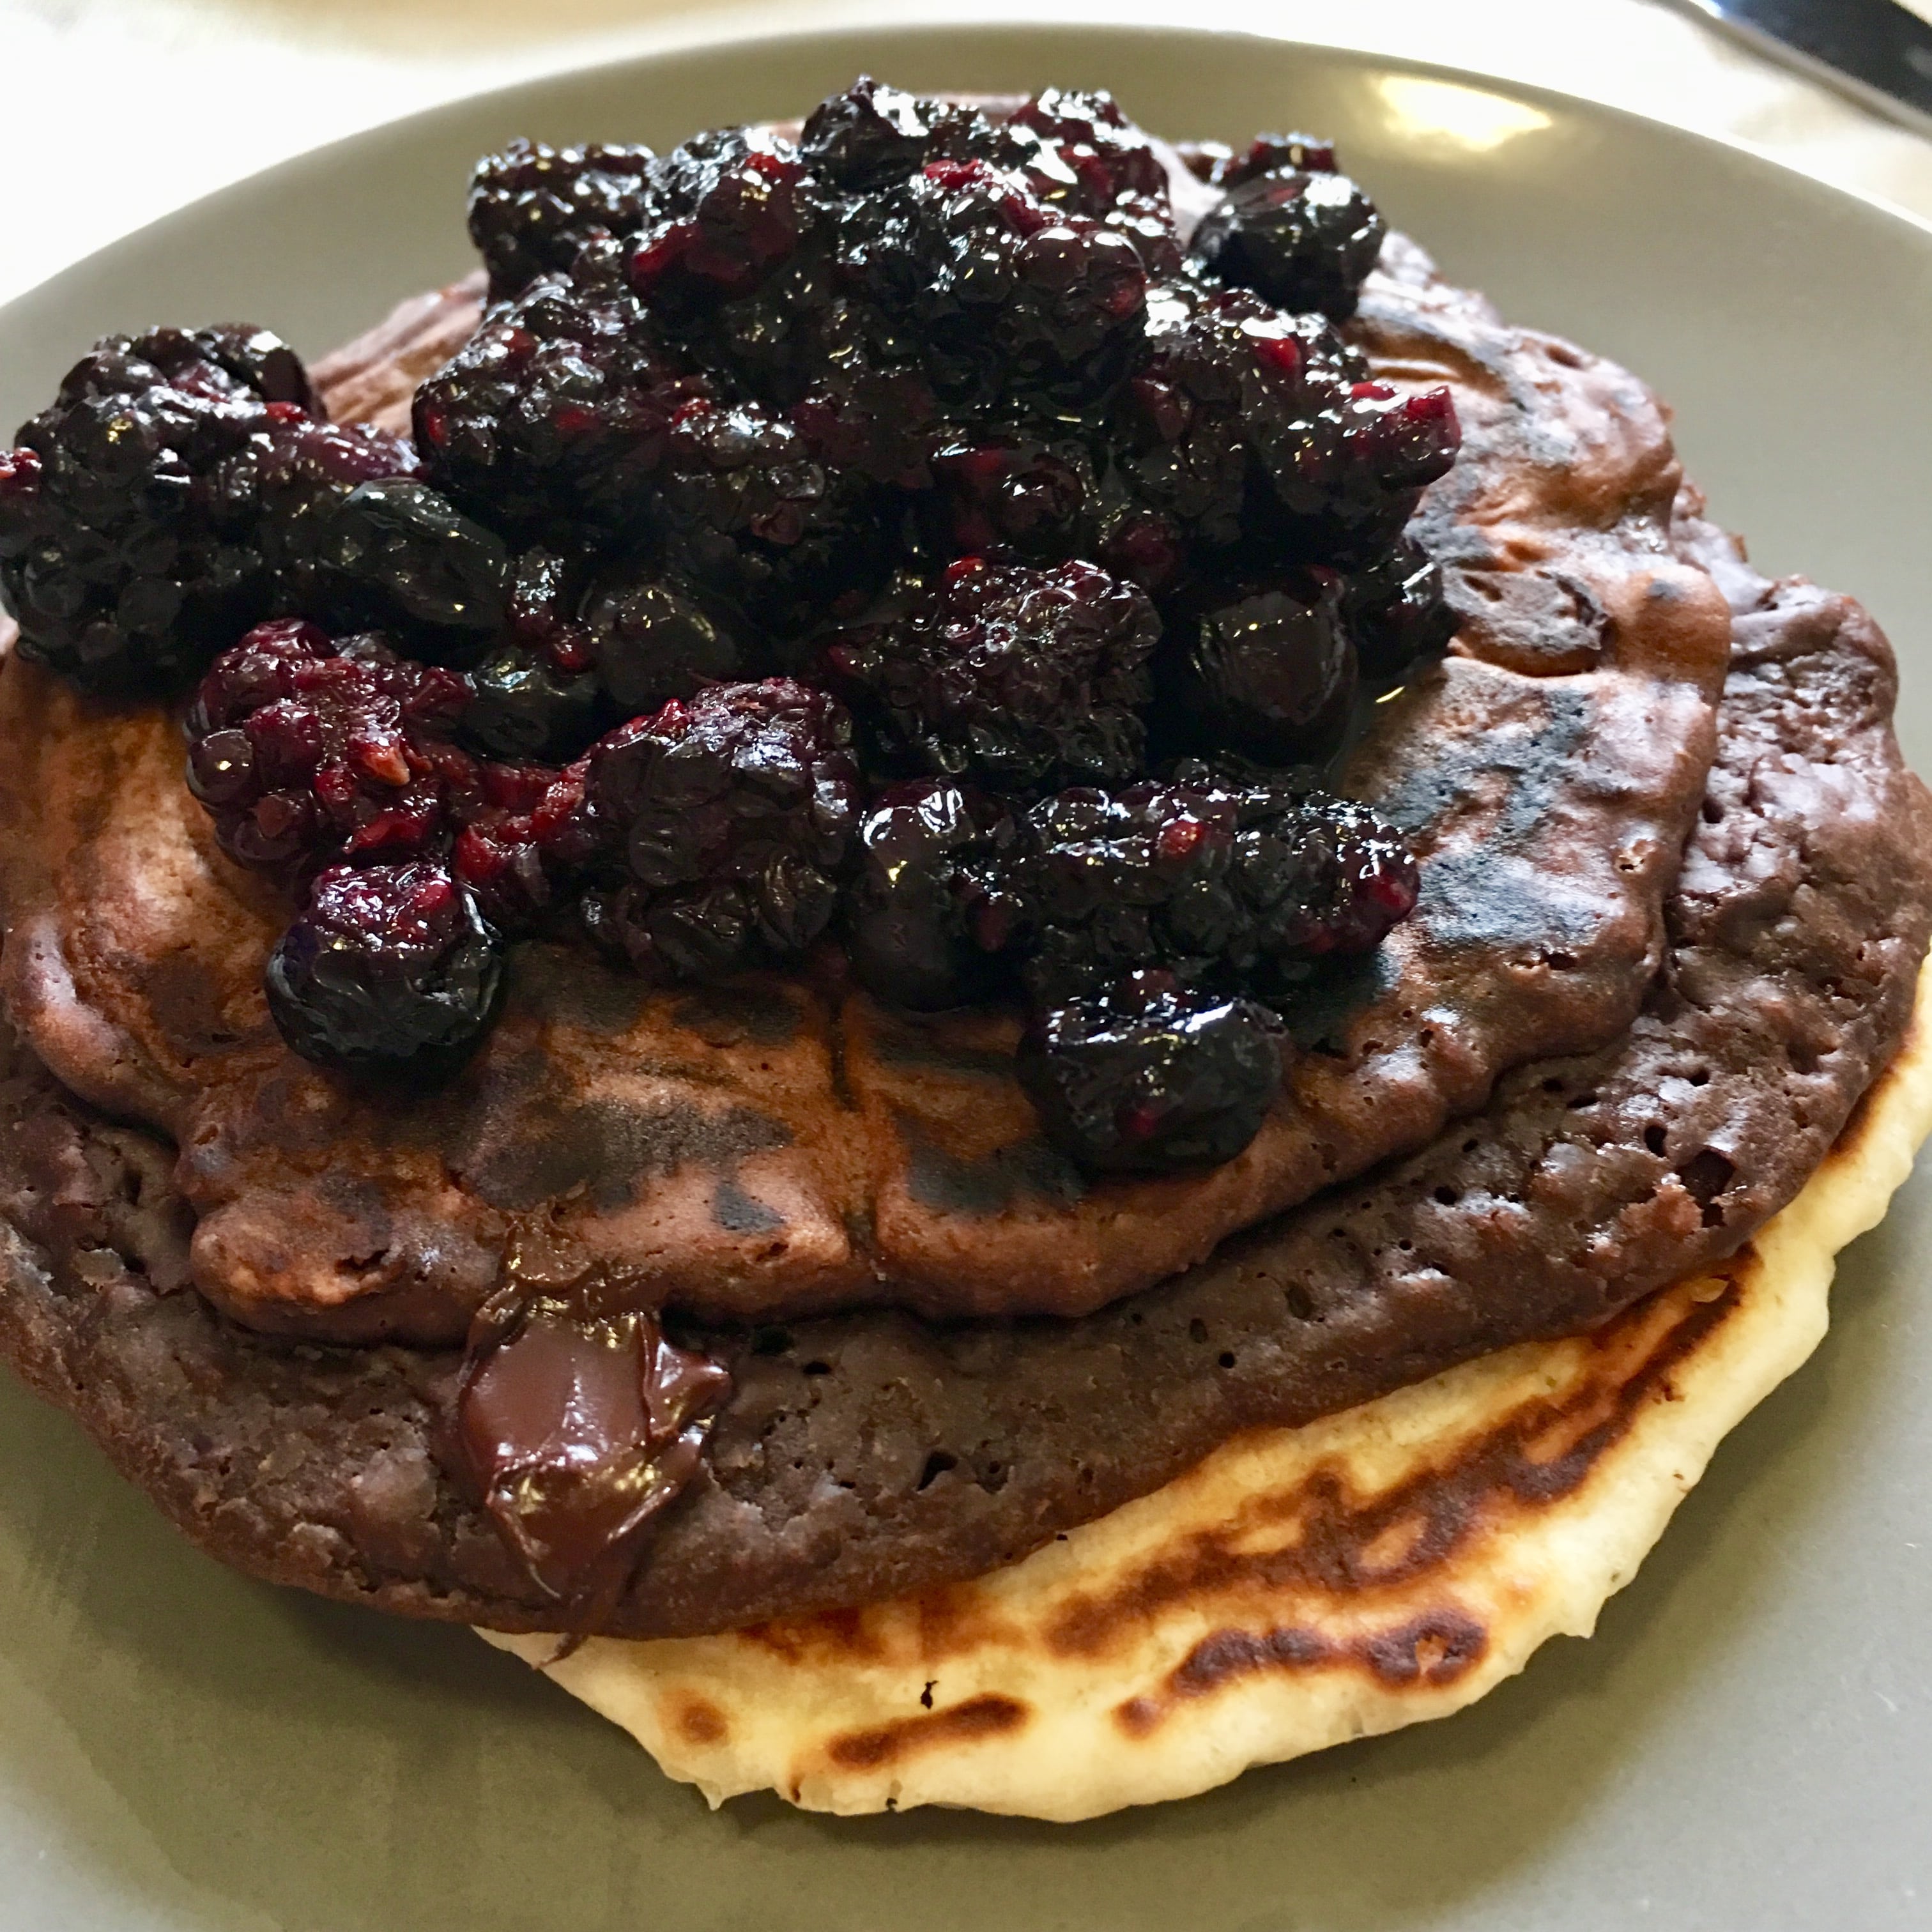 Healthy berry compote and pancakes